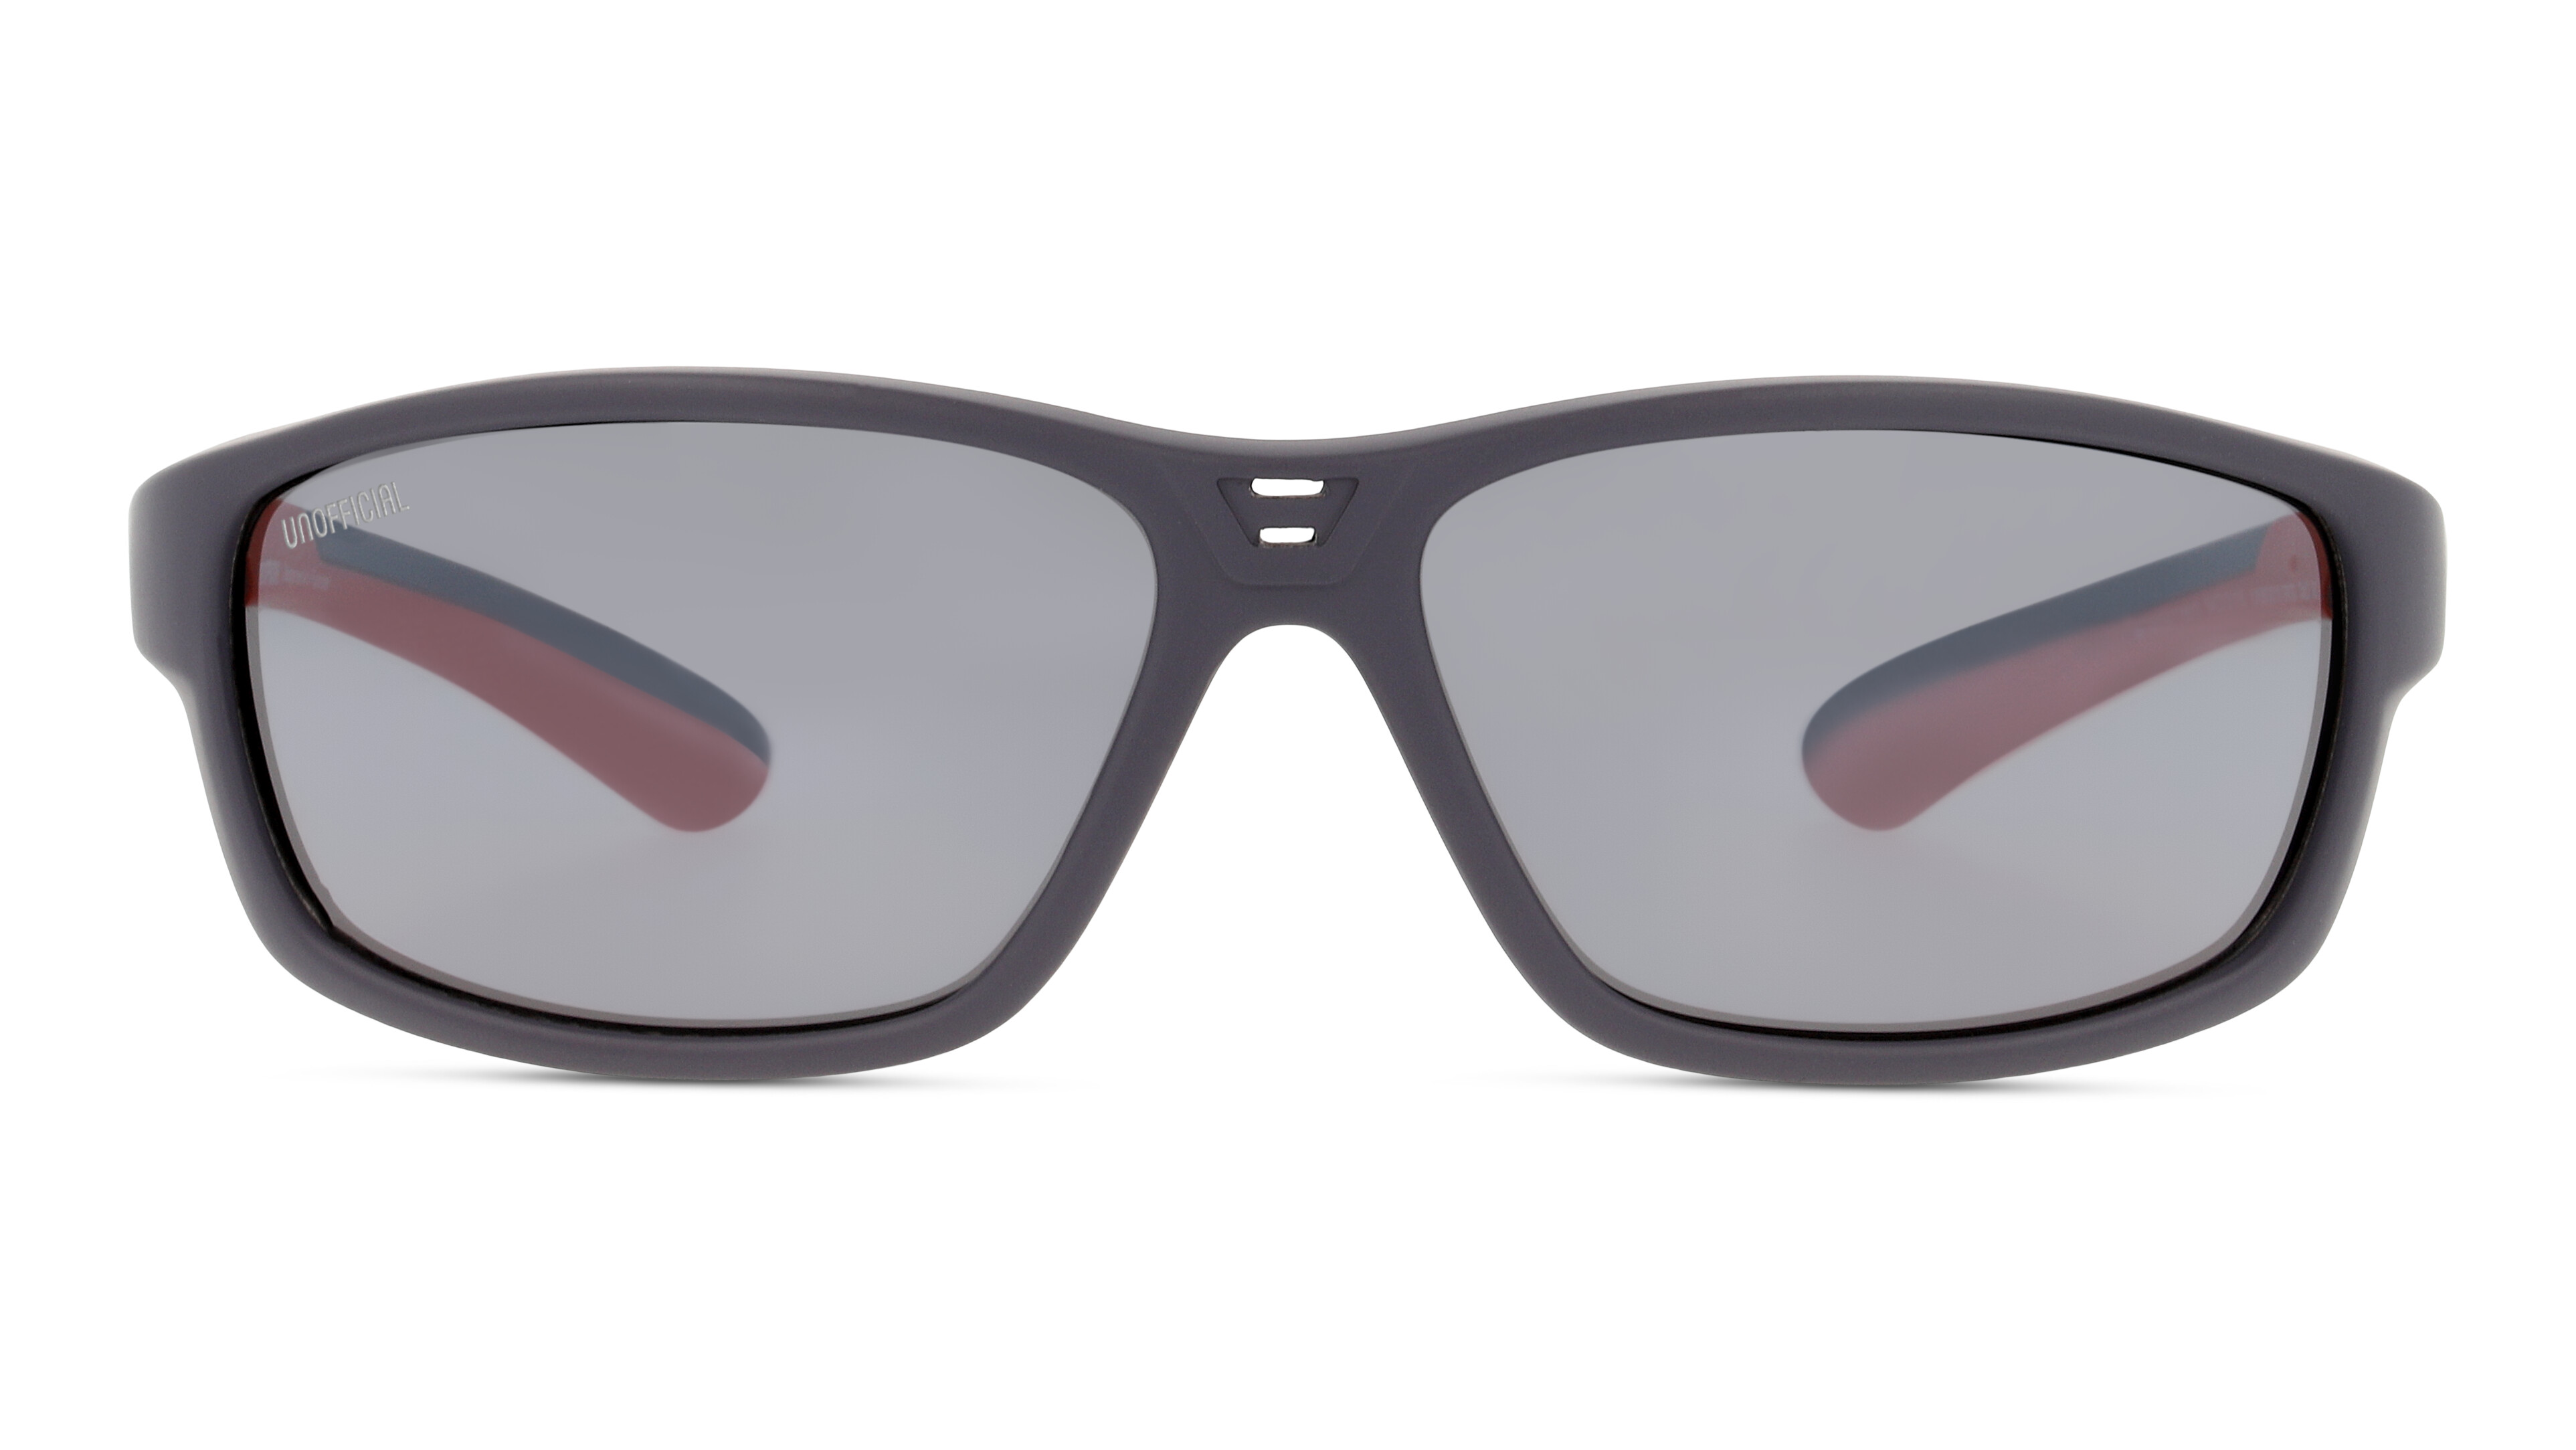 [products.image.front] UNOFFICIAL UNSK0010 GRGS Sonnenbrille